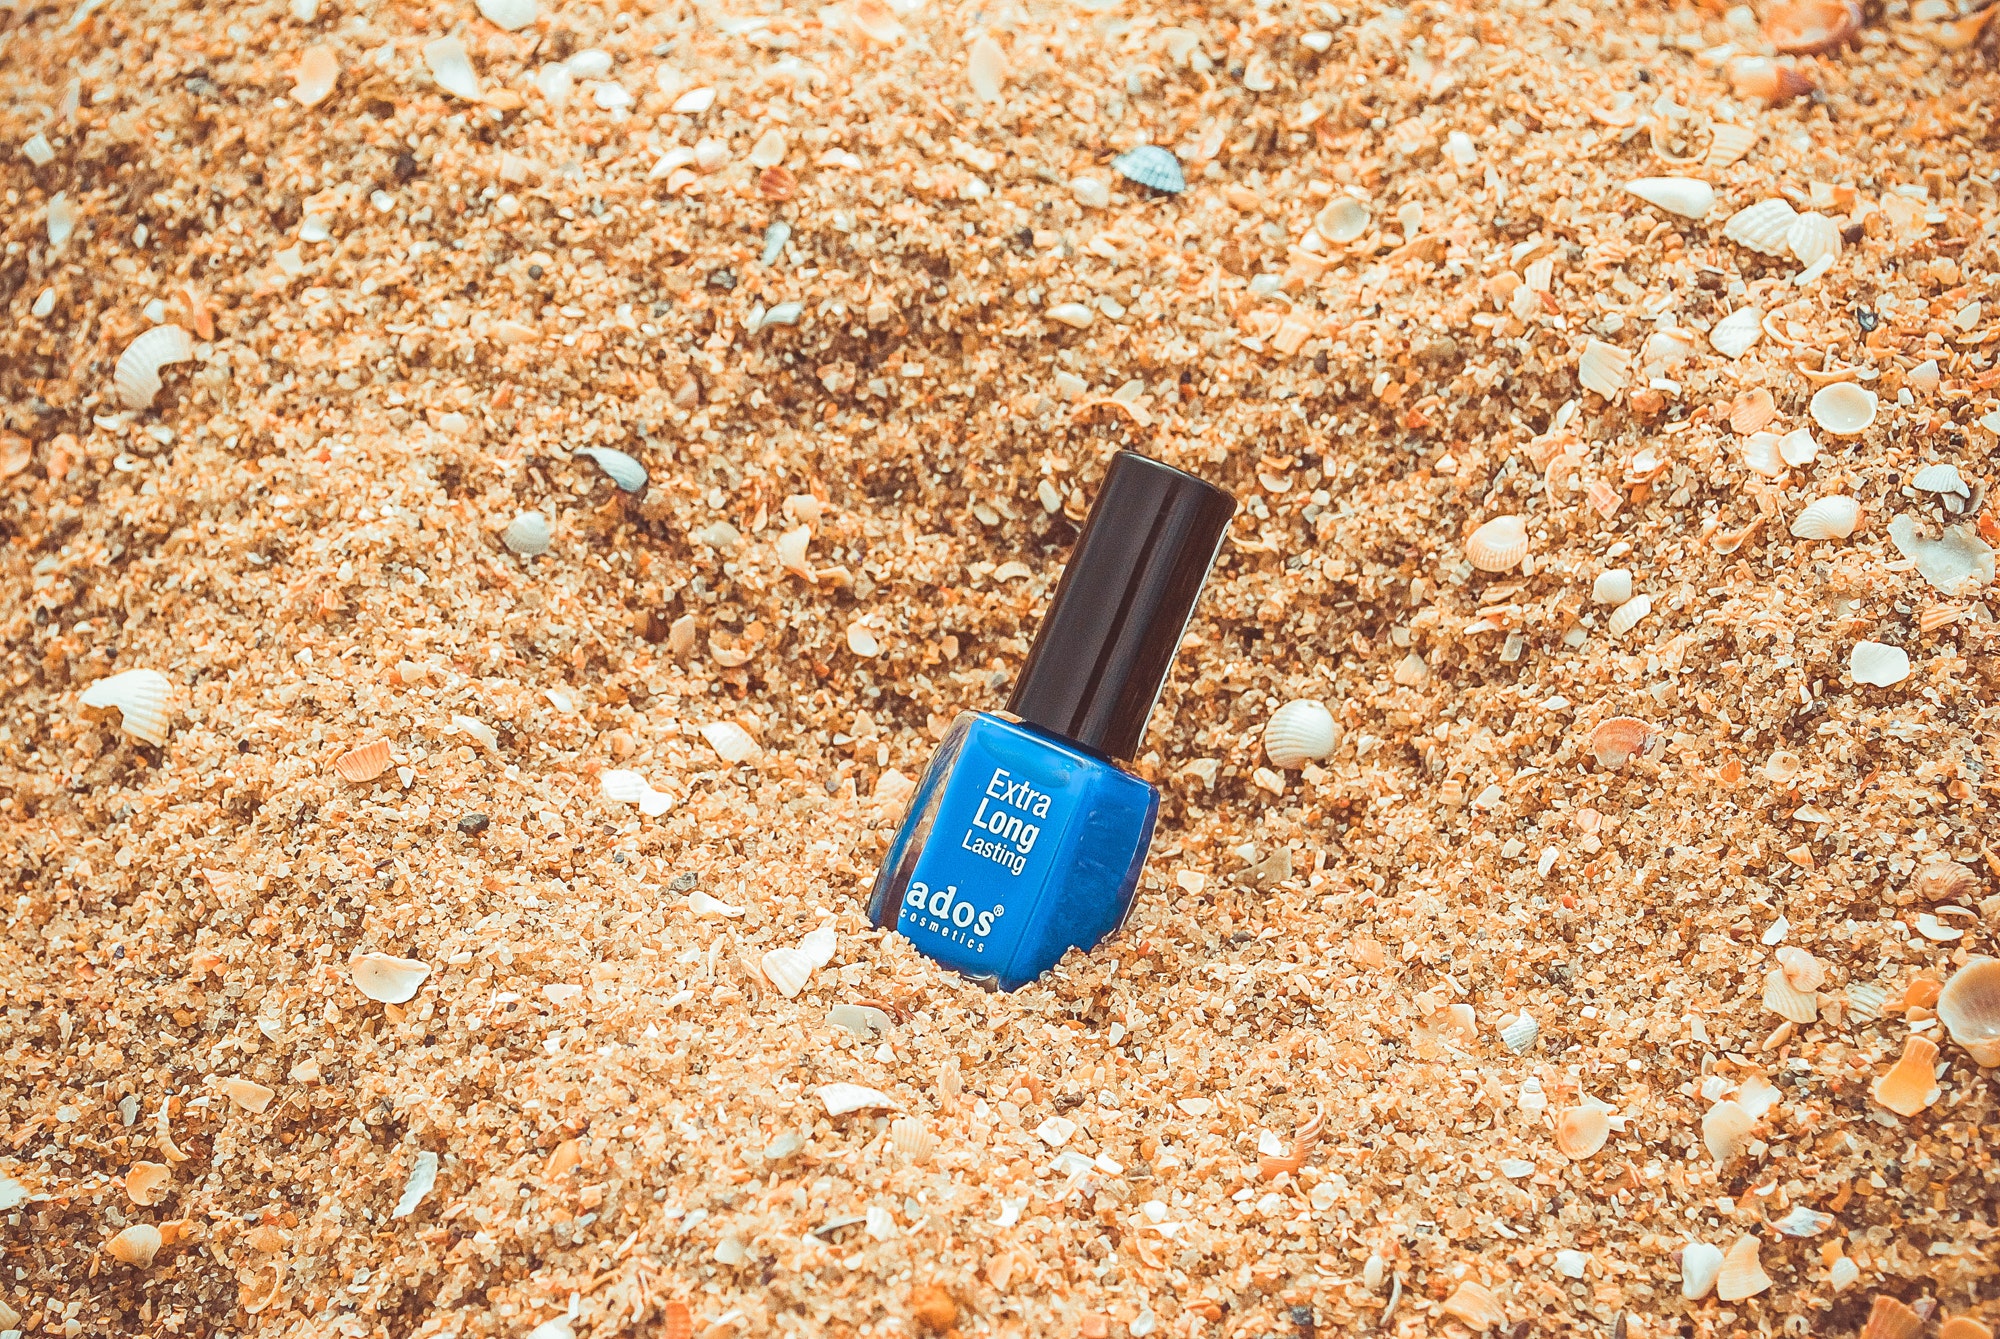 An image of a blue colored nail polish | Source: Pexels